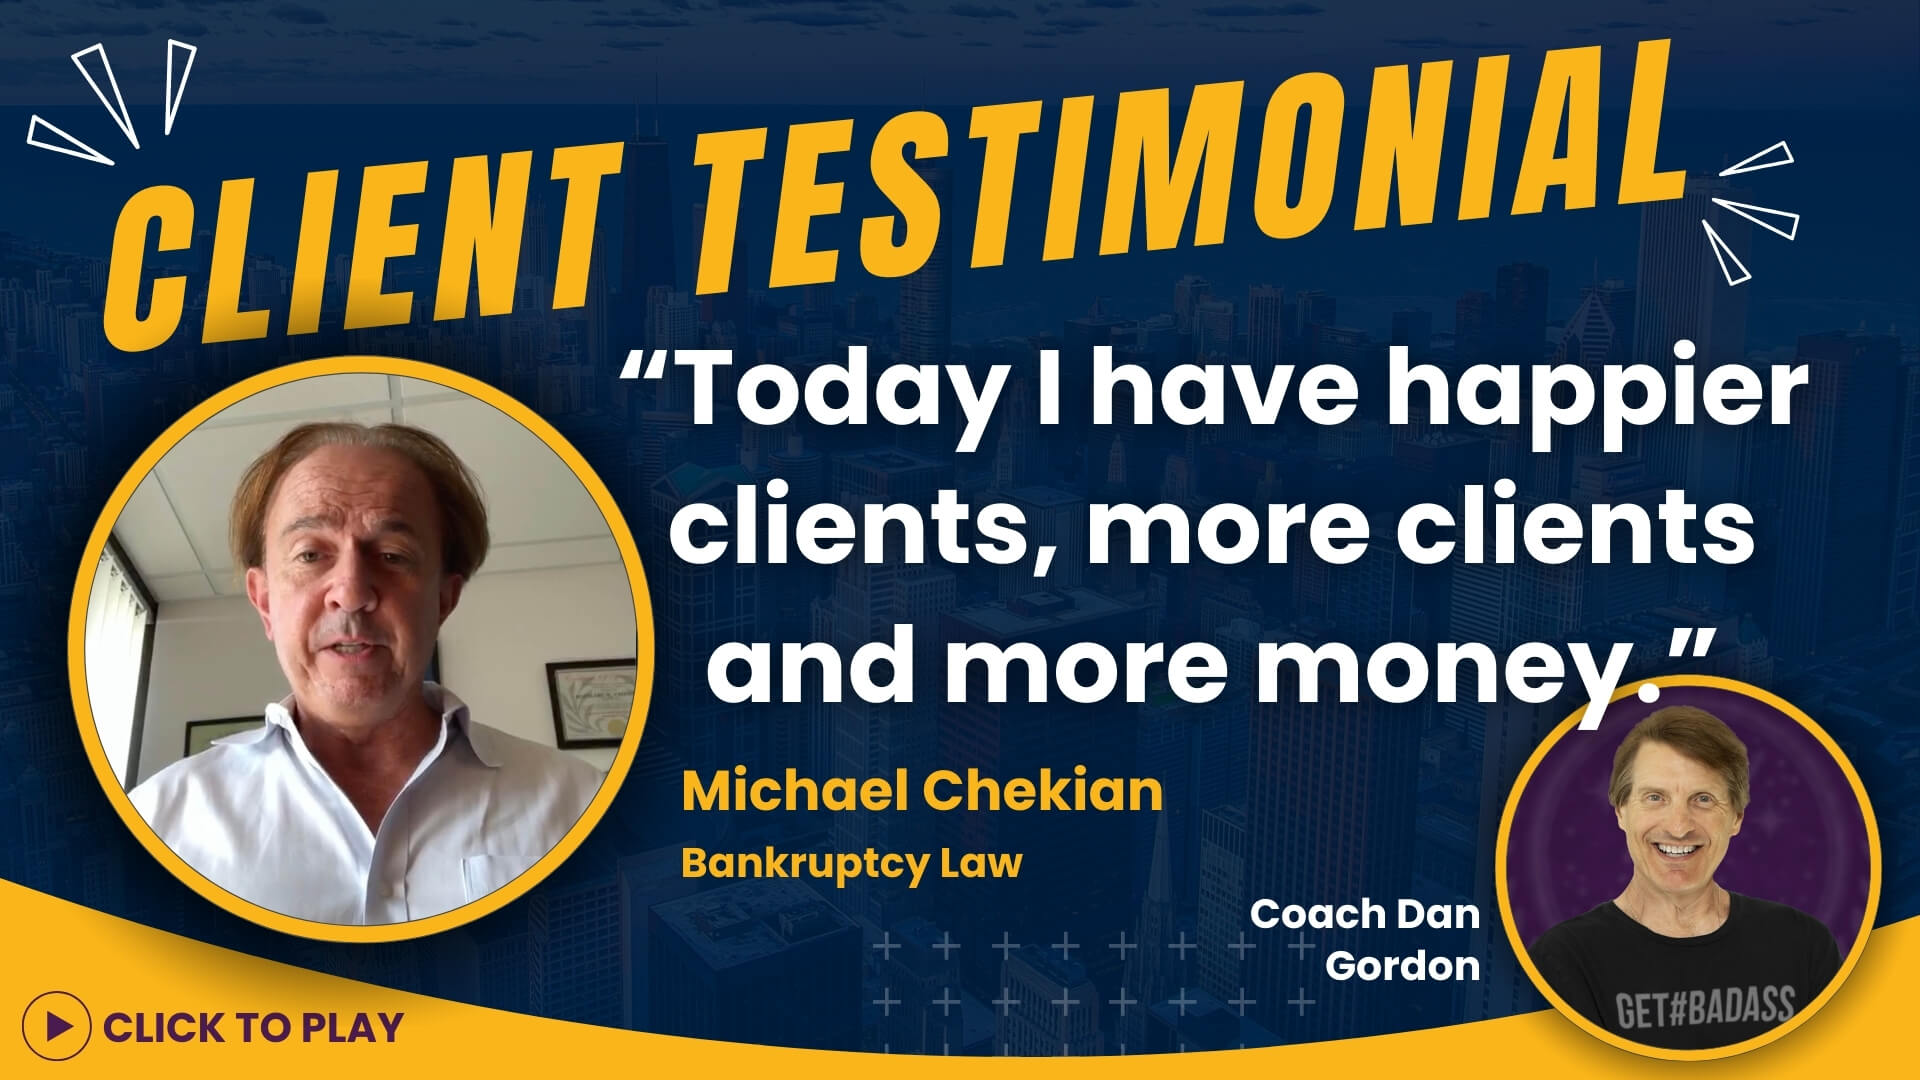 Michael Chekian, Bankruptcy Attorney, shares a positive testimonial for Coach Dan Gordon, with a backdrop of city skyline, their smiling faces, and a quote on client happiness.